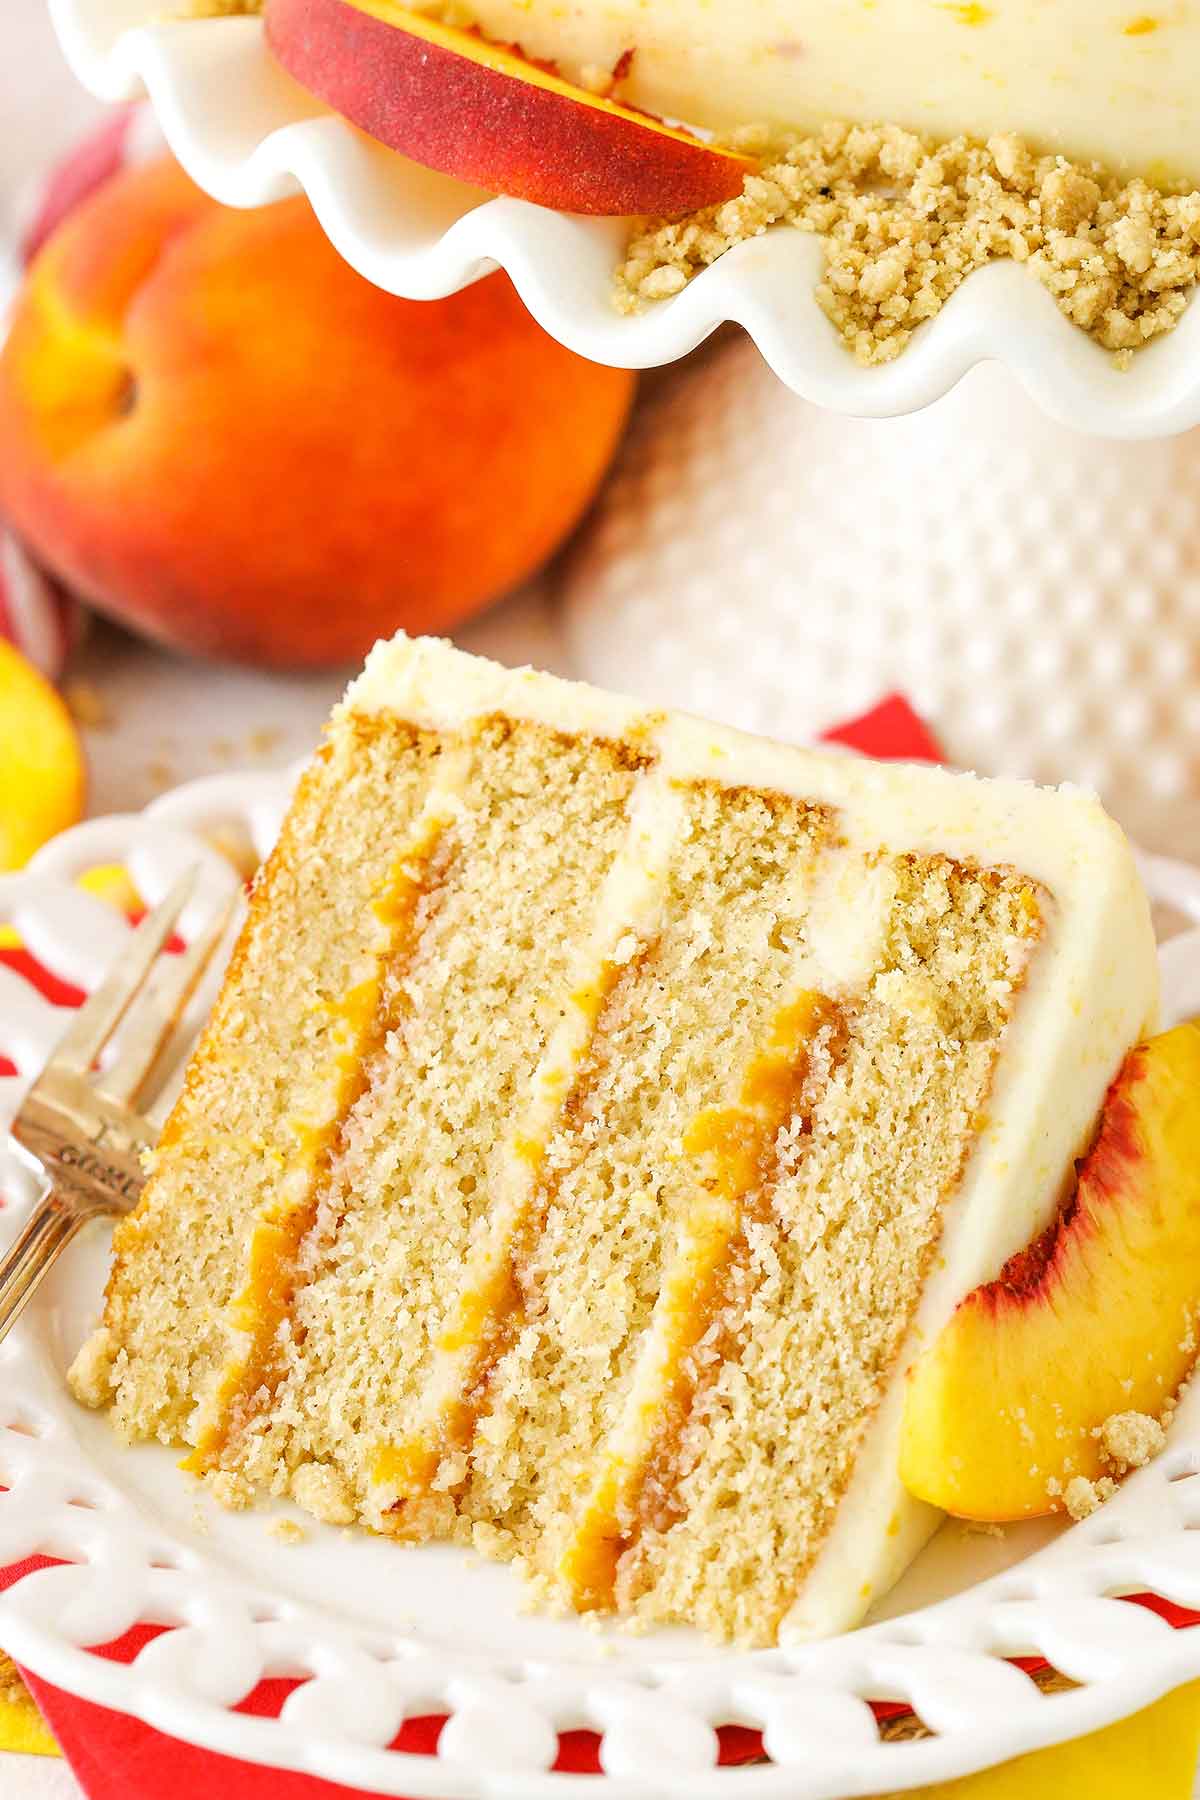 A slice of Brown Sugar Layer Cake With Peach Filling next to a silver fork on a white plate